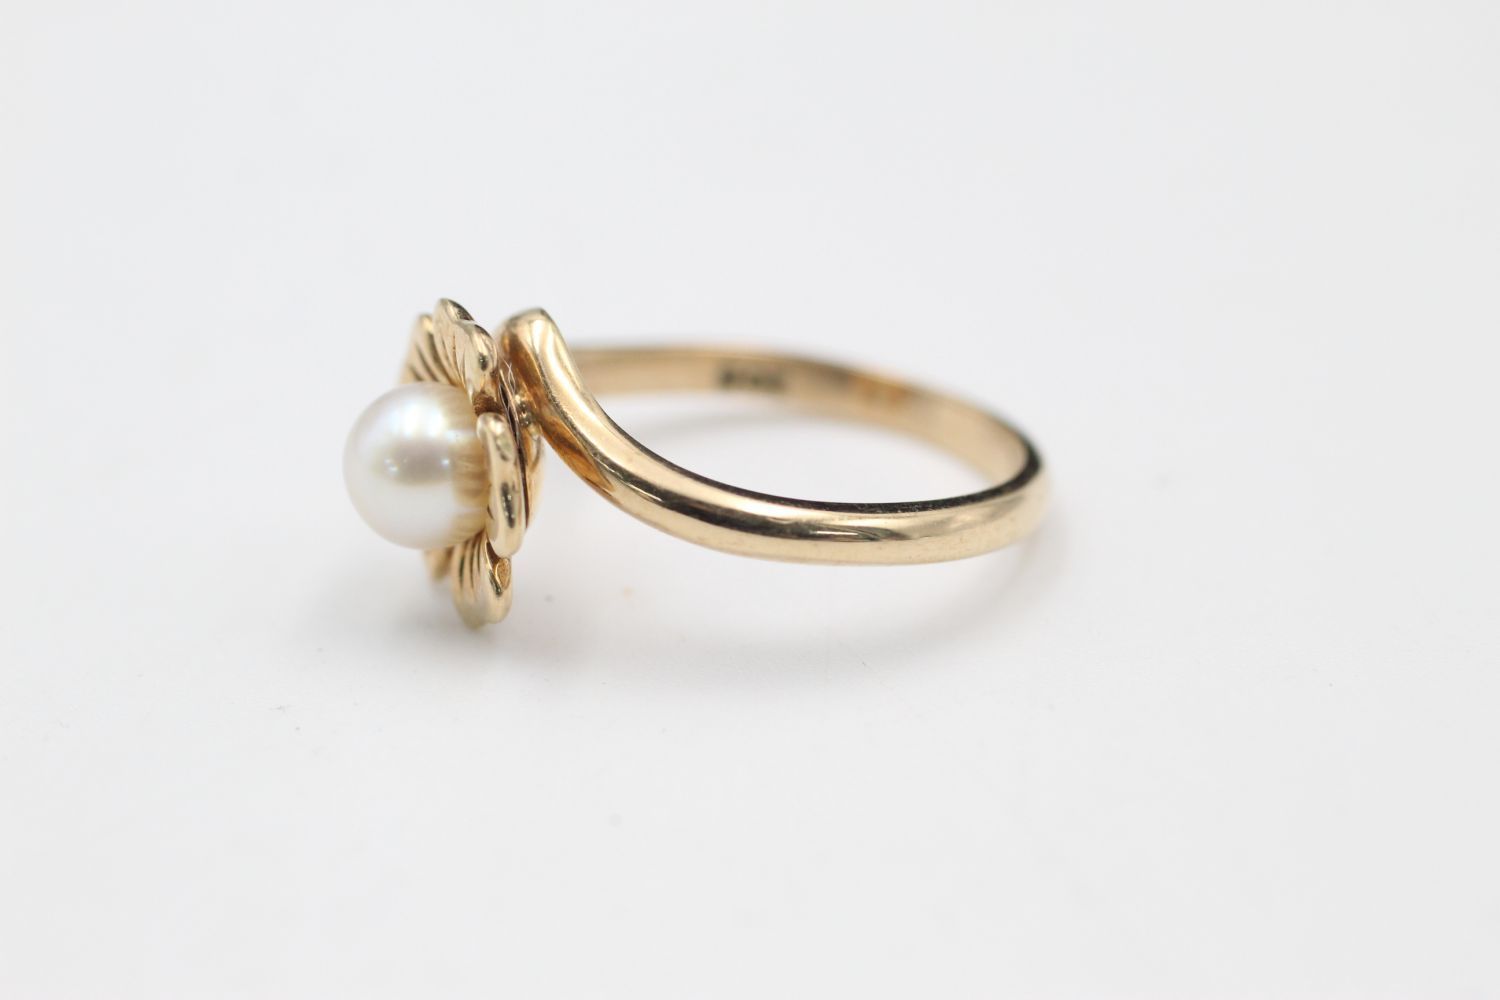 9ct gold pearl flower ring 3.4 grams gross - Image 2 of 4